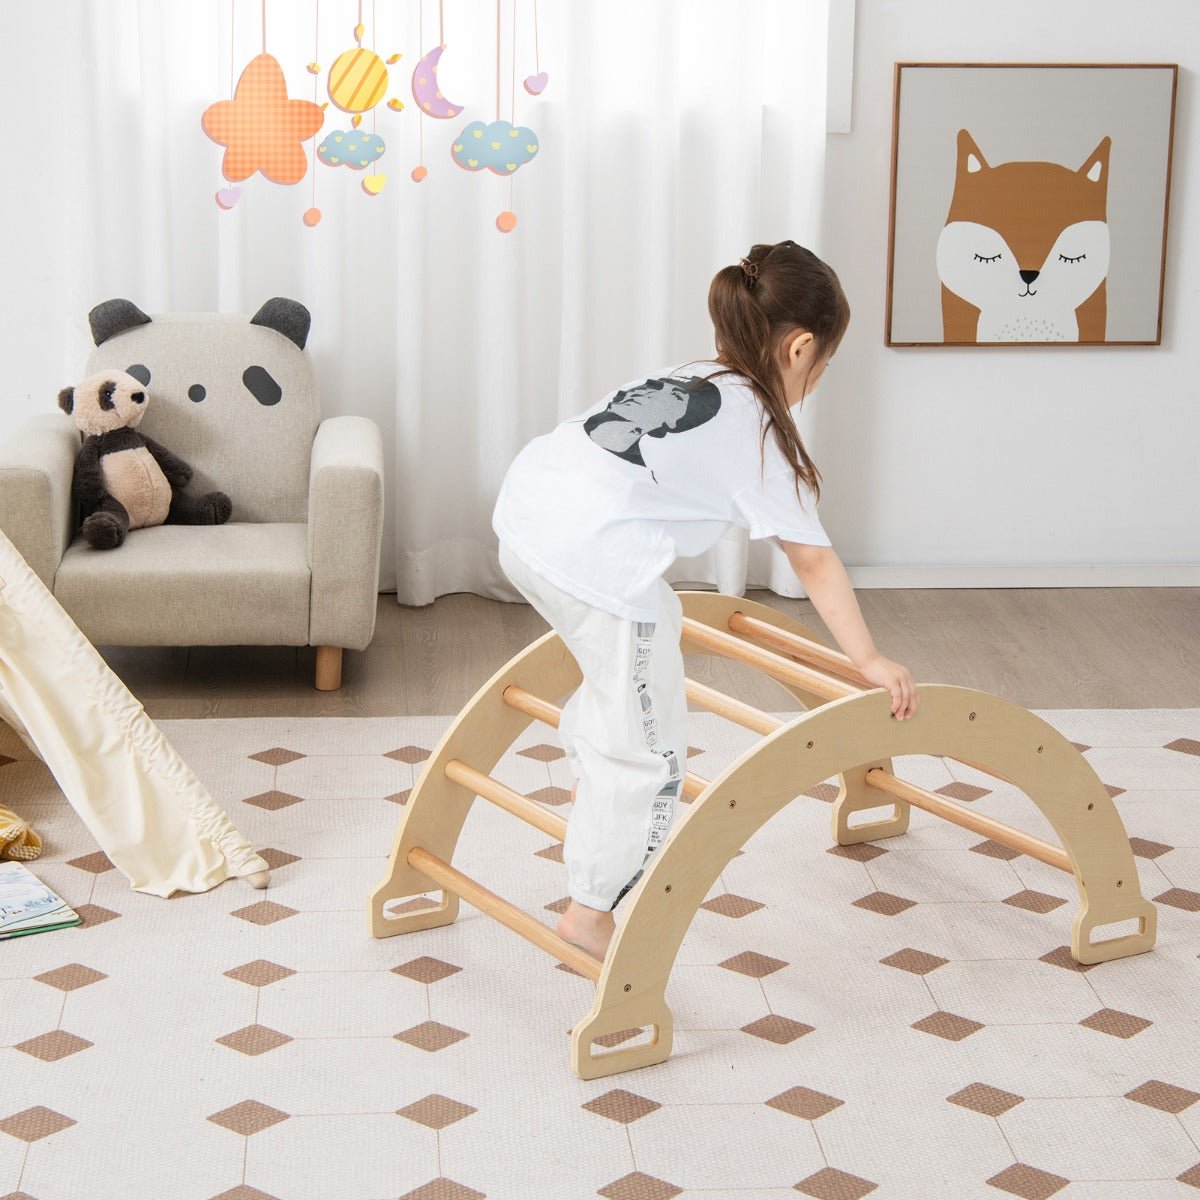 Double-Sided Wooden Arch Rocker for Toddlers - Explore, Rock, Play